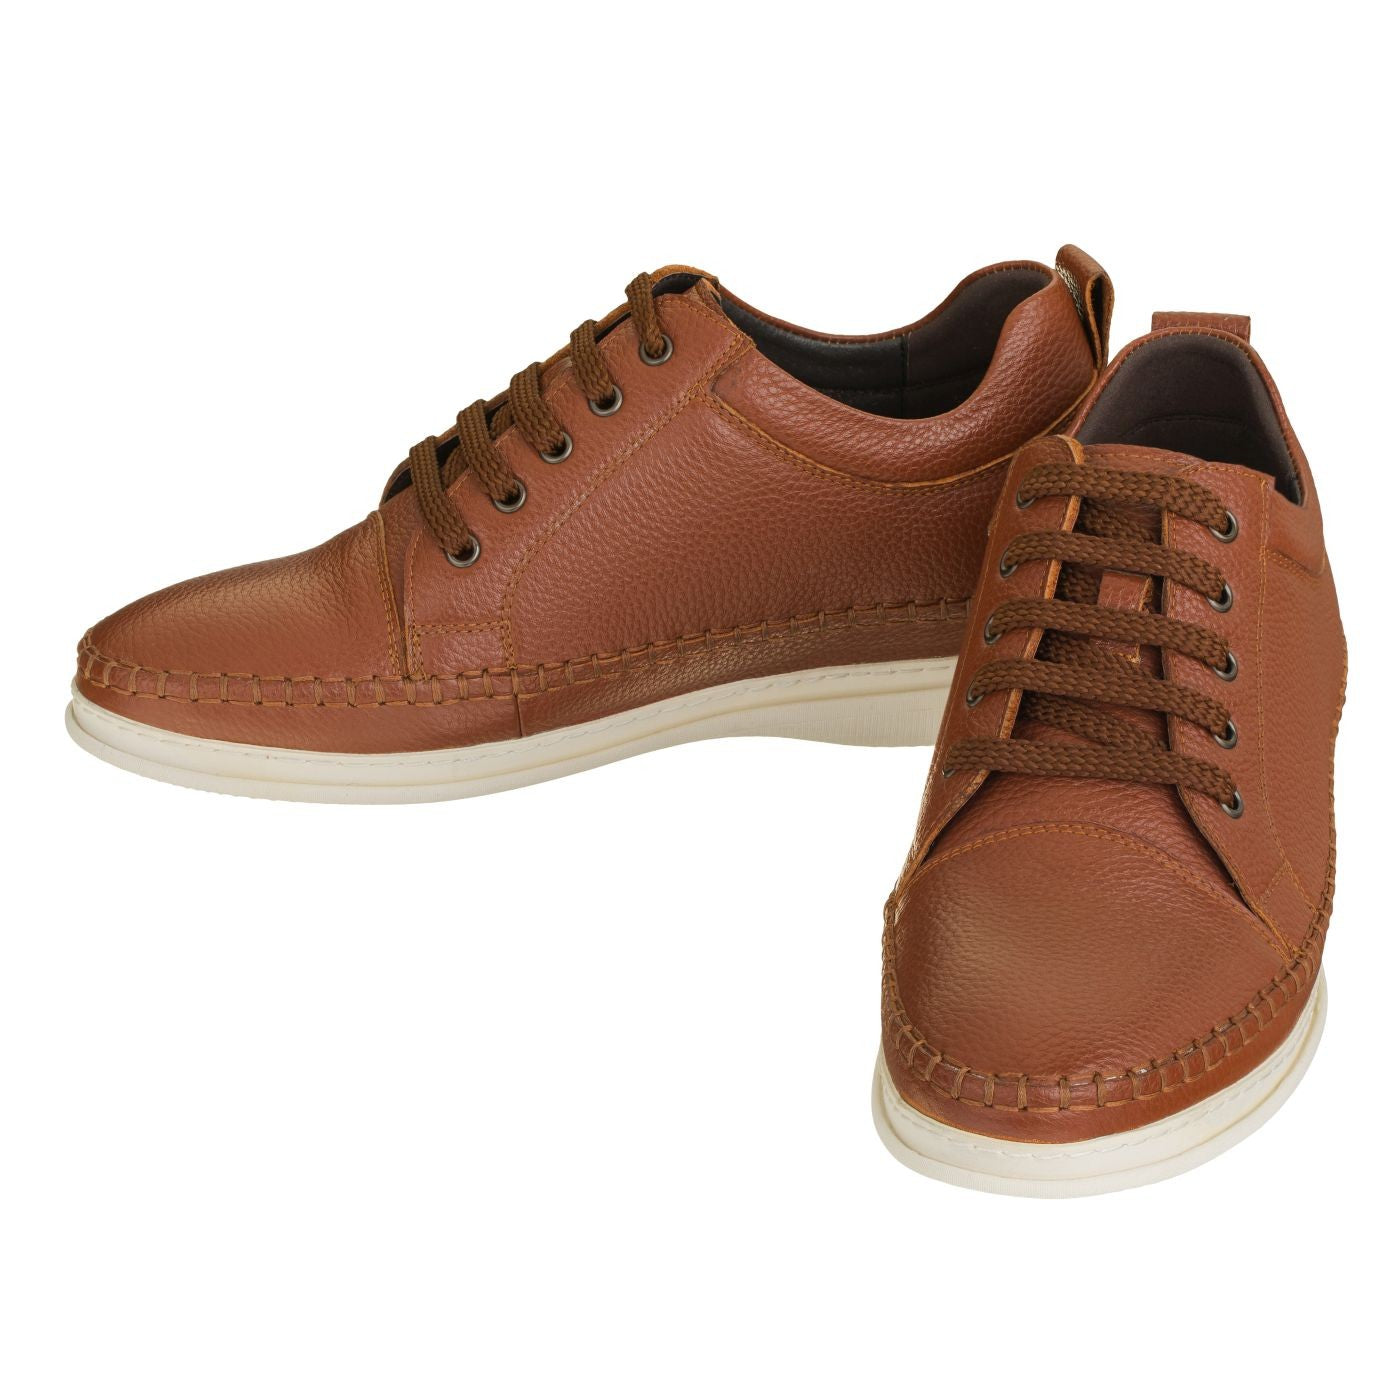 Elevator shoes height increase CALTO Casual 3 Inch Leather Elevator Sneakers - Brown - S4313